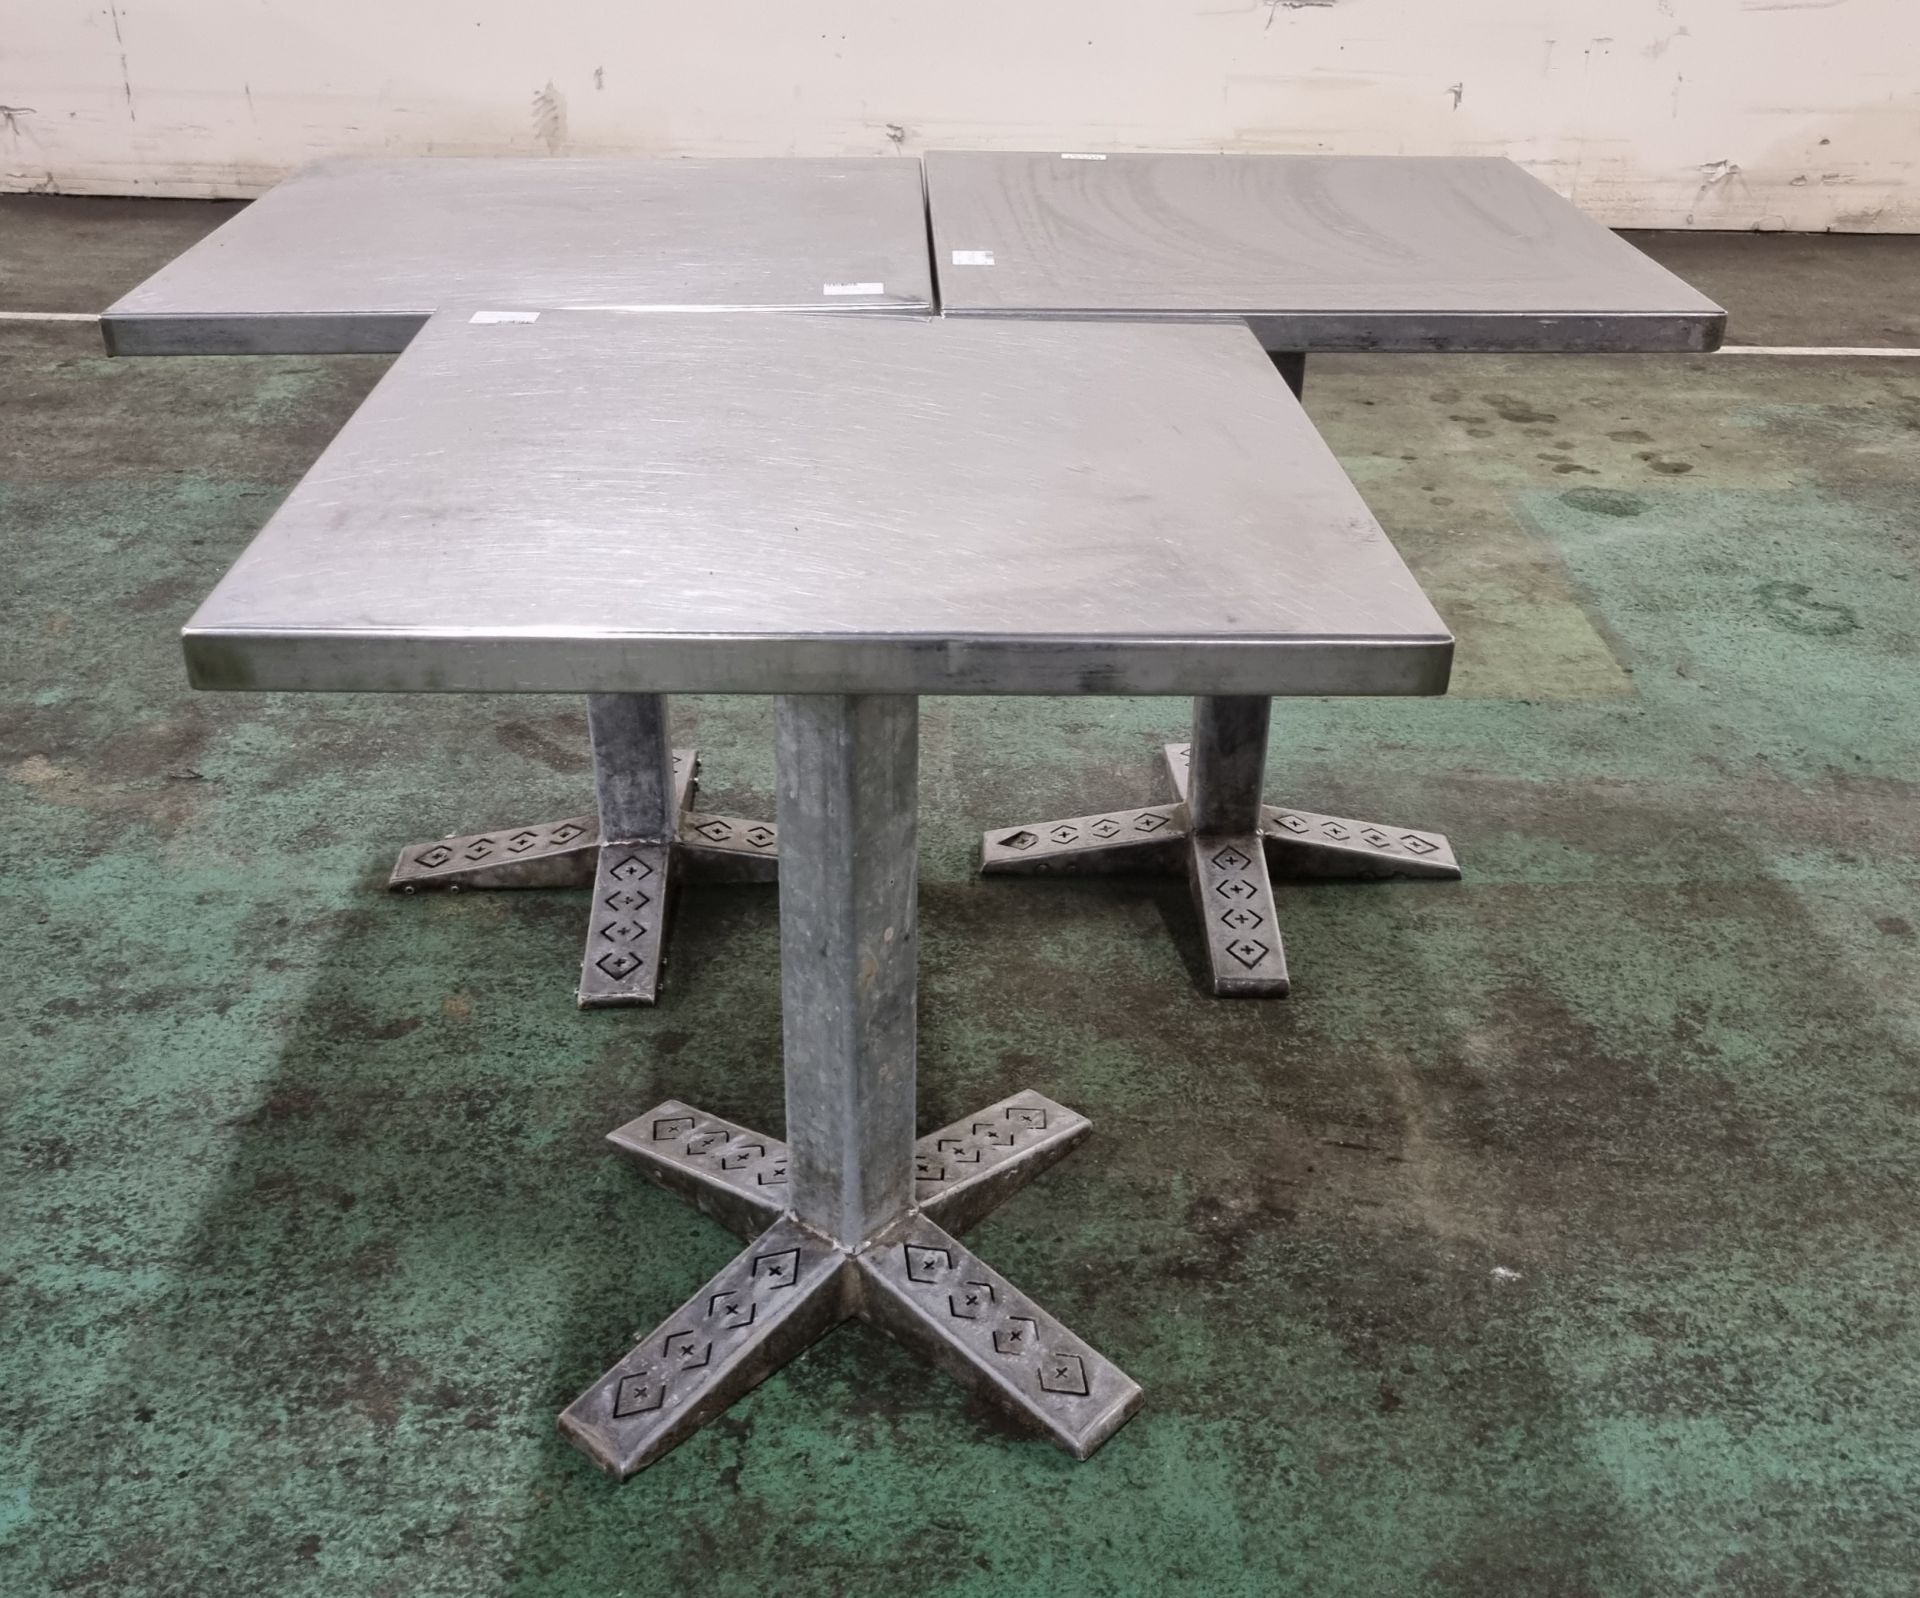 3x Square metal tables - W 700 x D 700 x H 750 mm - Image 2 of 5